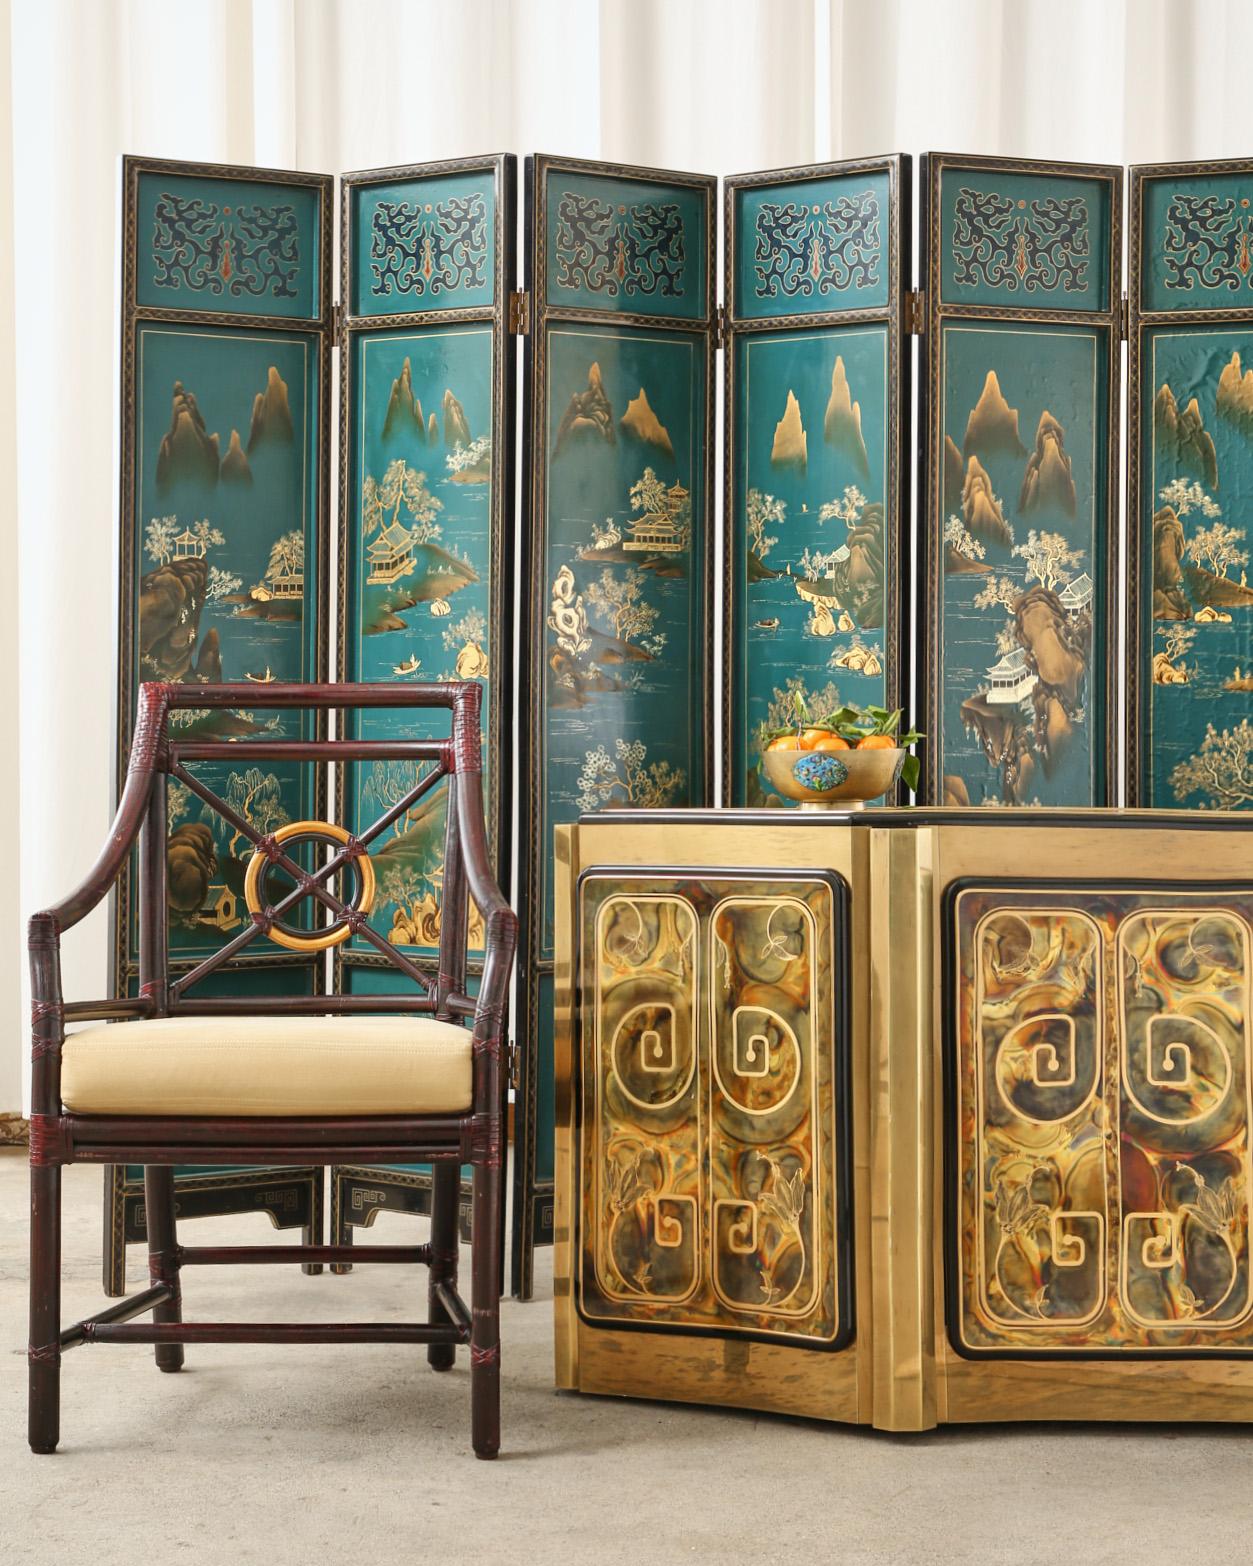 Charming Chinese export six-panel lacquered coromandel screen featuring idyllic painted mountain landscape scenes over a dramatic turquoise ground. The lacquered wood panels are inset with the painted scenes and have a geometric gilt border trim.